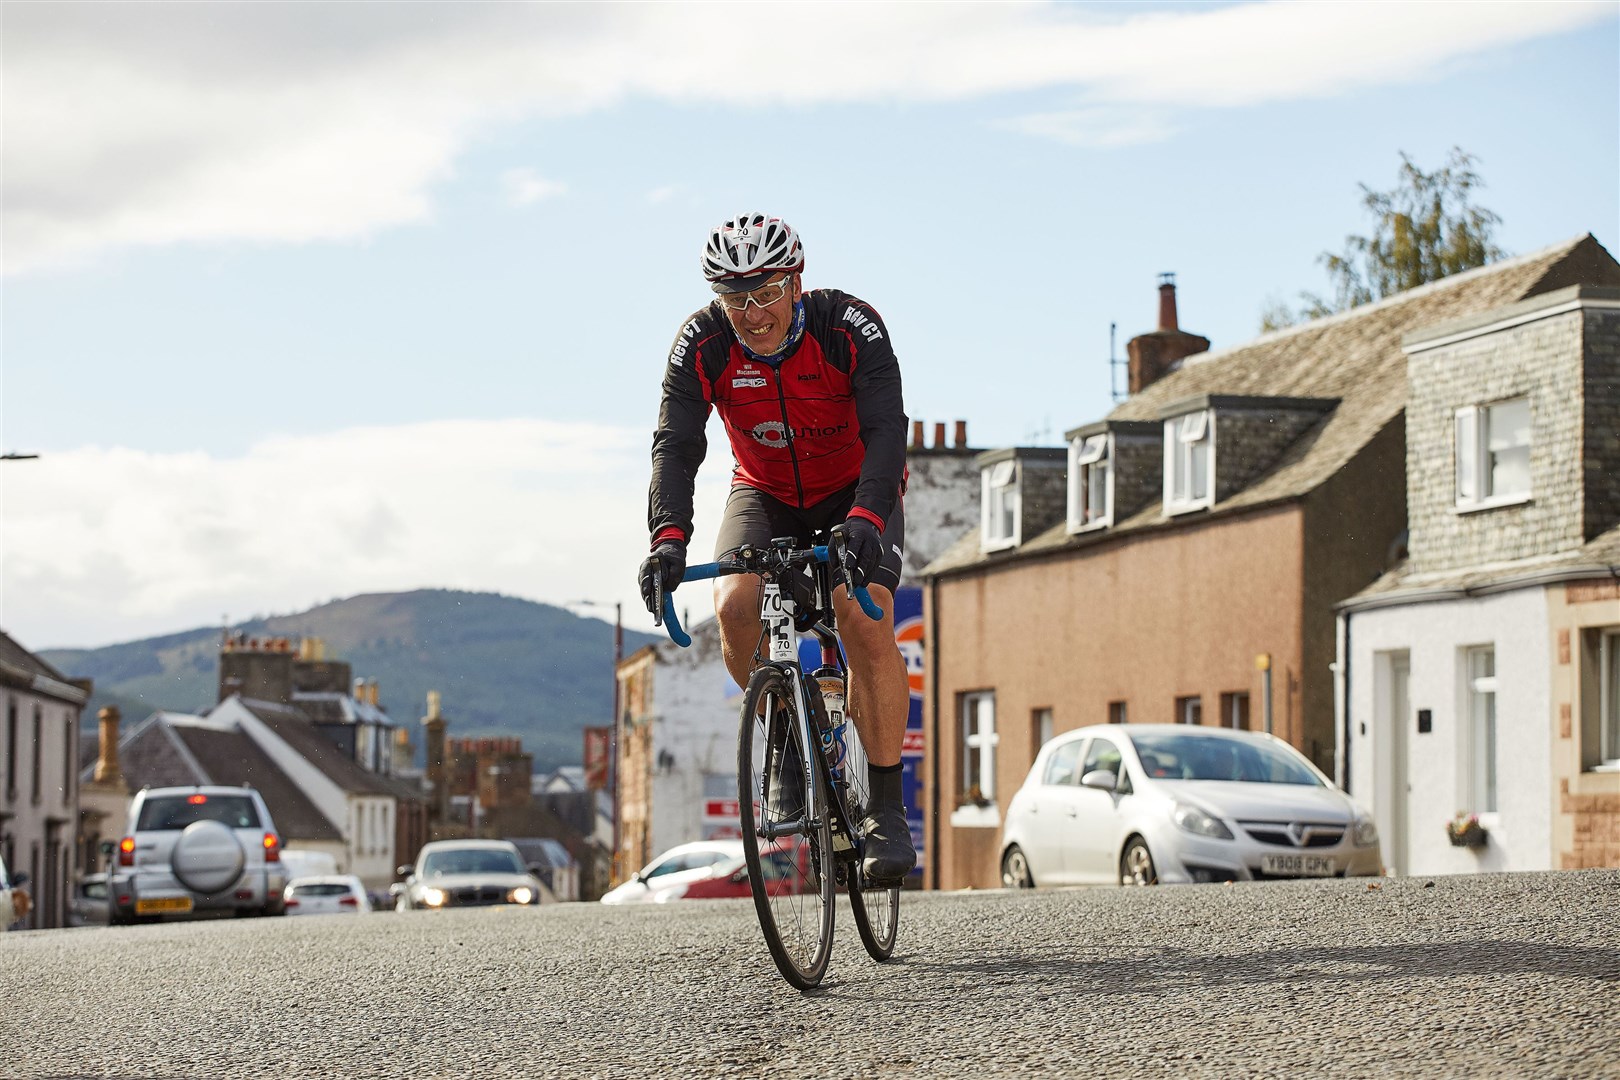 Evanton cyclist William MacLennan will be the first Scot to compete in the Race Around Ireland later this year. Pic taken while on the "Around the world in a day" 240 mile cycle with Mark Beaumont last September.